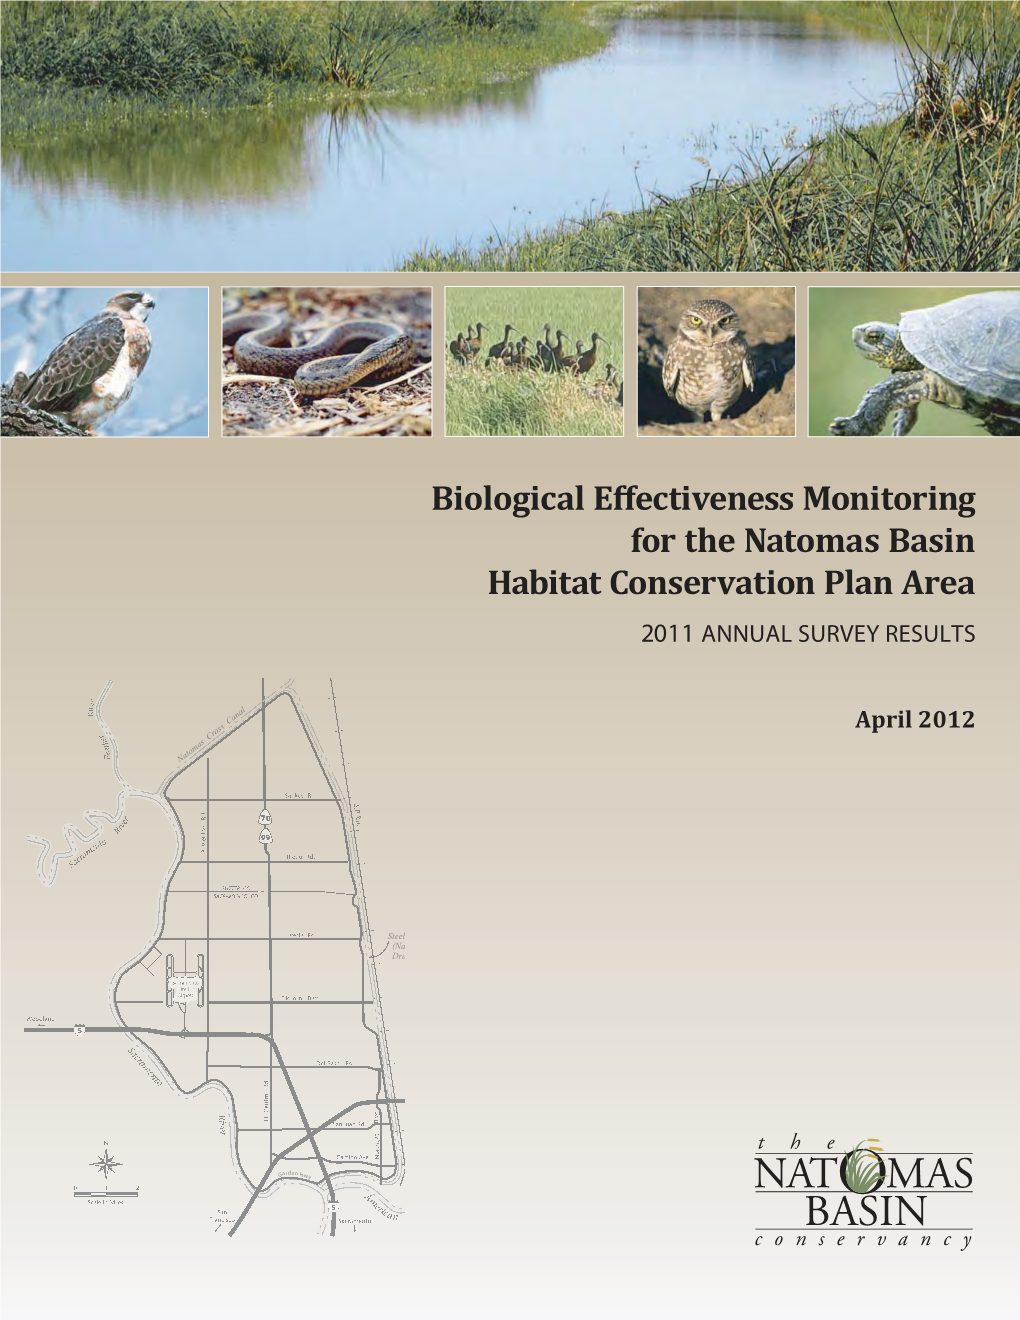 2011 Biological Effectiveness Monitoring Report for the Natomas